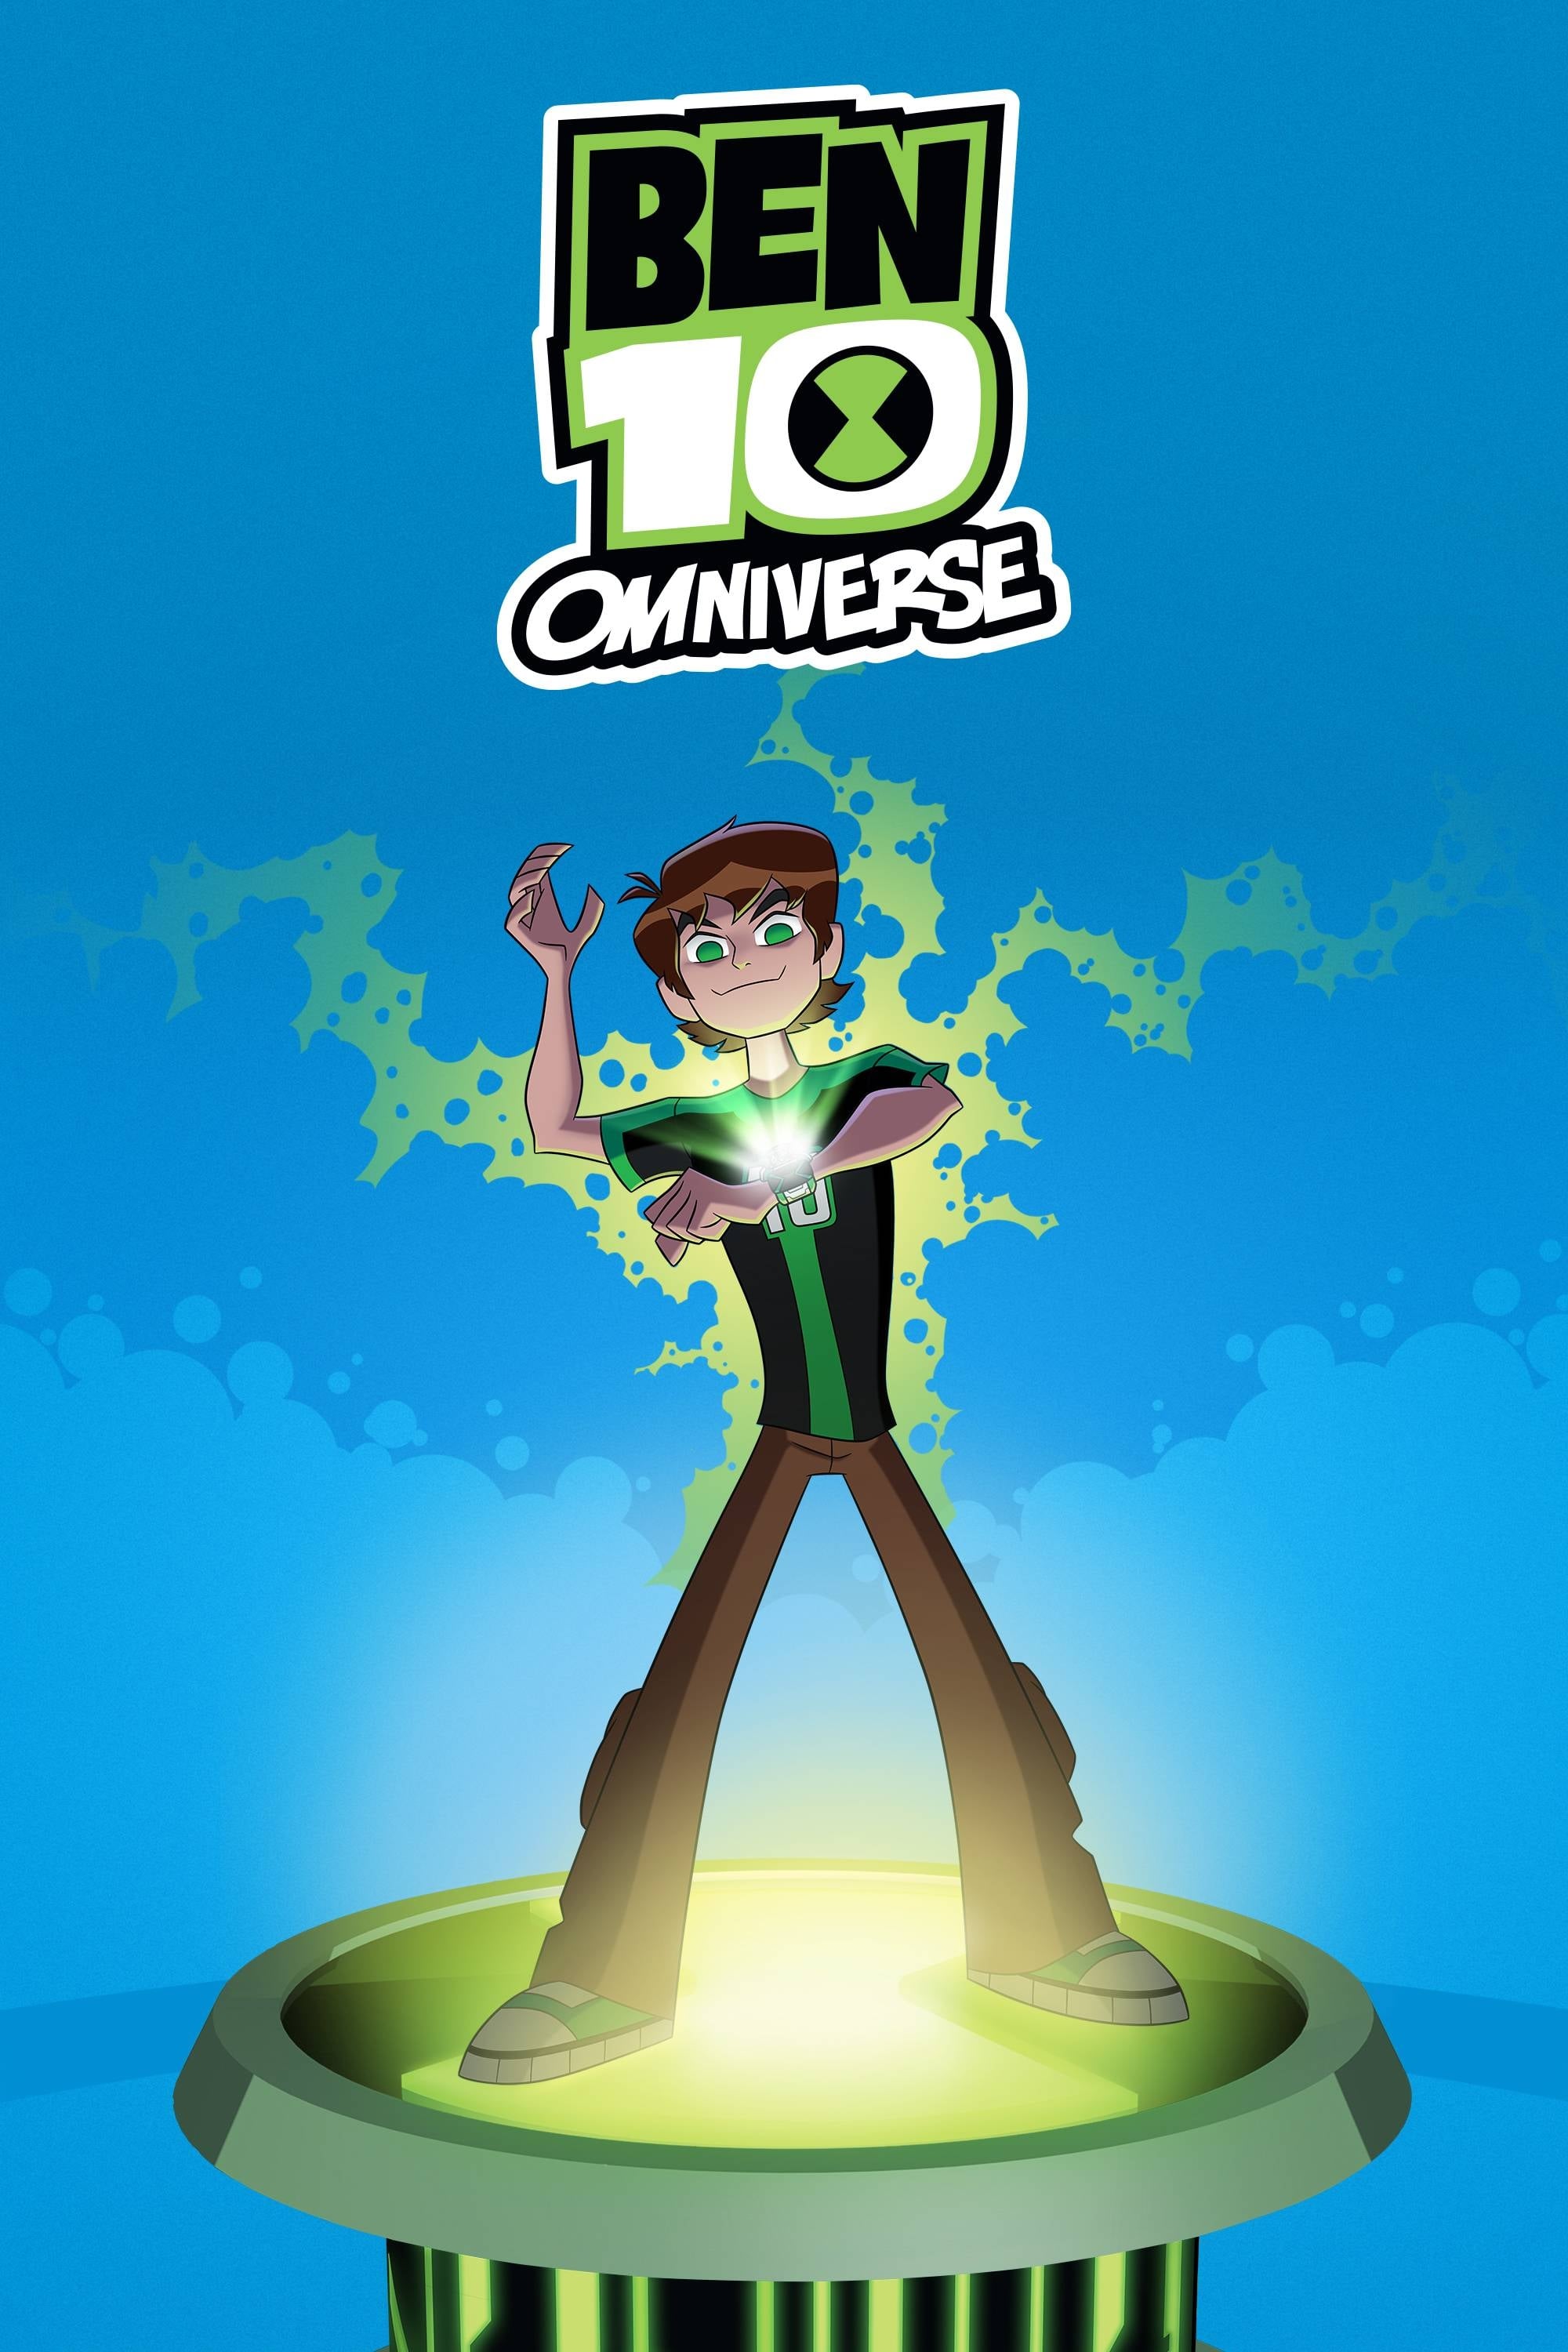 Ben 10: Omniverse TV Shows About Parallel World